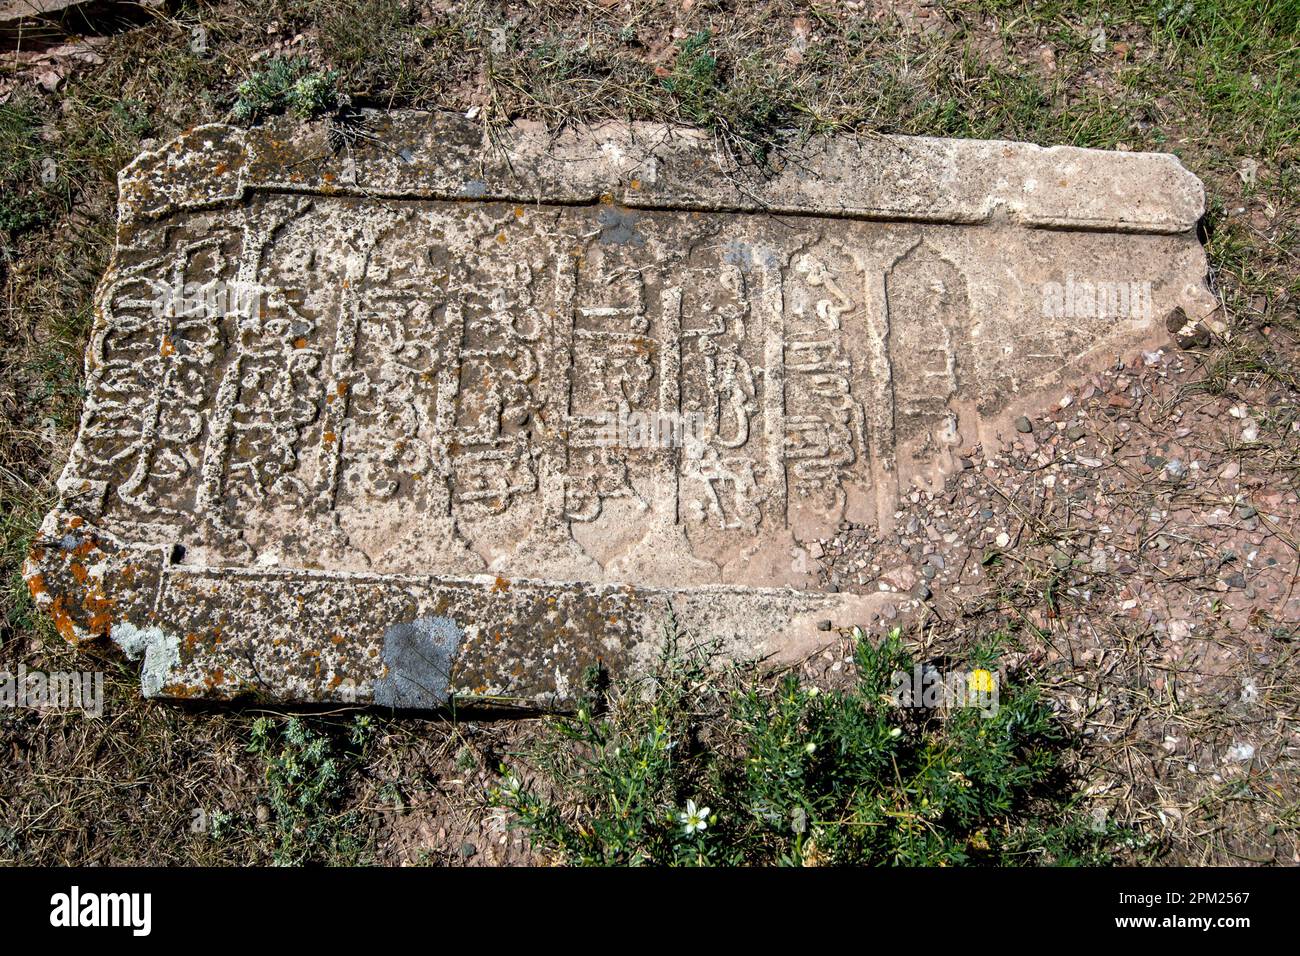 A fallen headstone lays in the abandoned cemetery adjacent to Ishak Pasa Palace at Dogubayazit in eastern Turkiye. Stock Photo